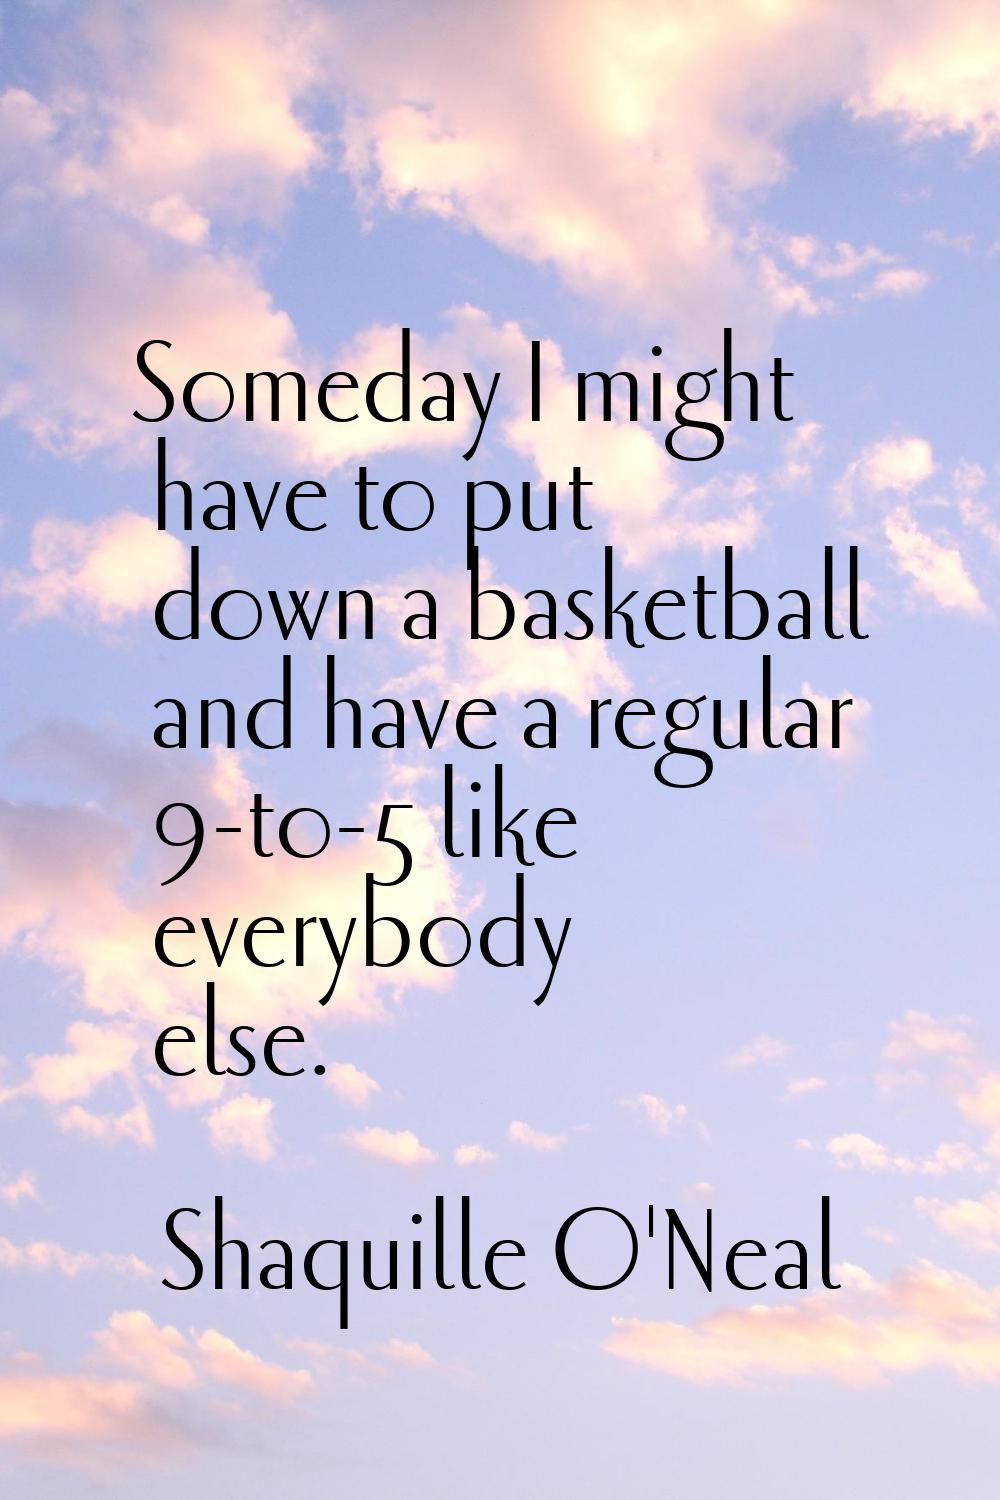 Someday I might have to put down a basketball and have a regular 9-to-5 like everybody else.